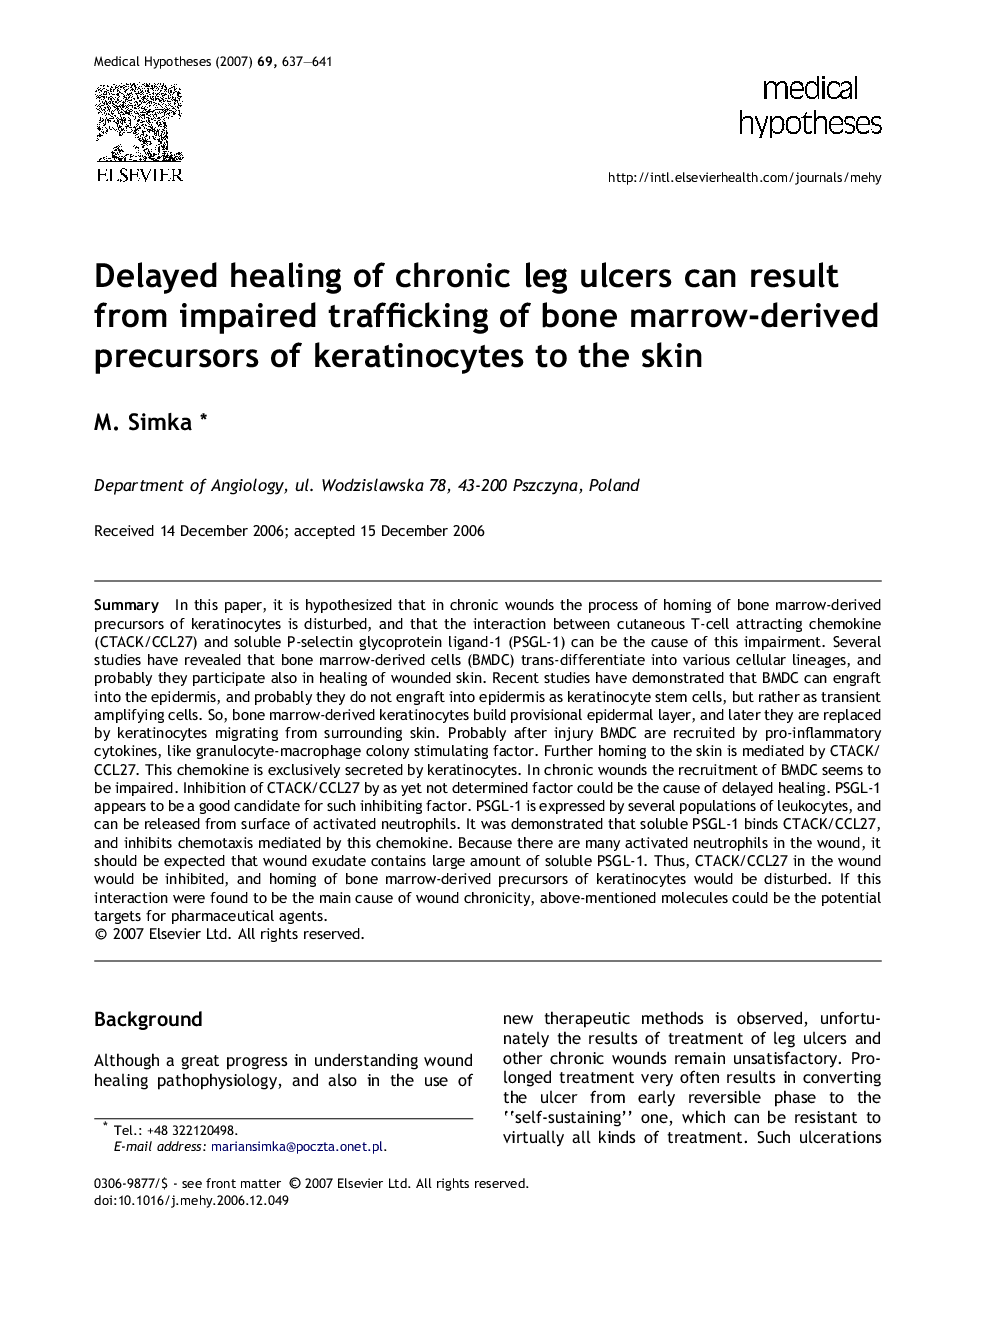 Delayed healing of chronic leg ulcers can result from impaired trafficking of bone marrow-derived precursors of keratinocytes to the skin